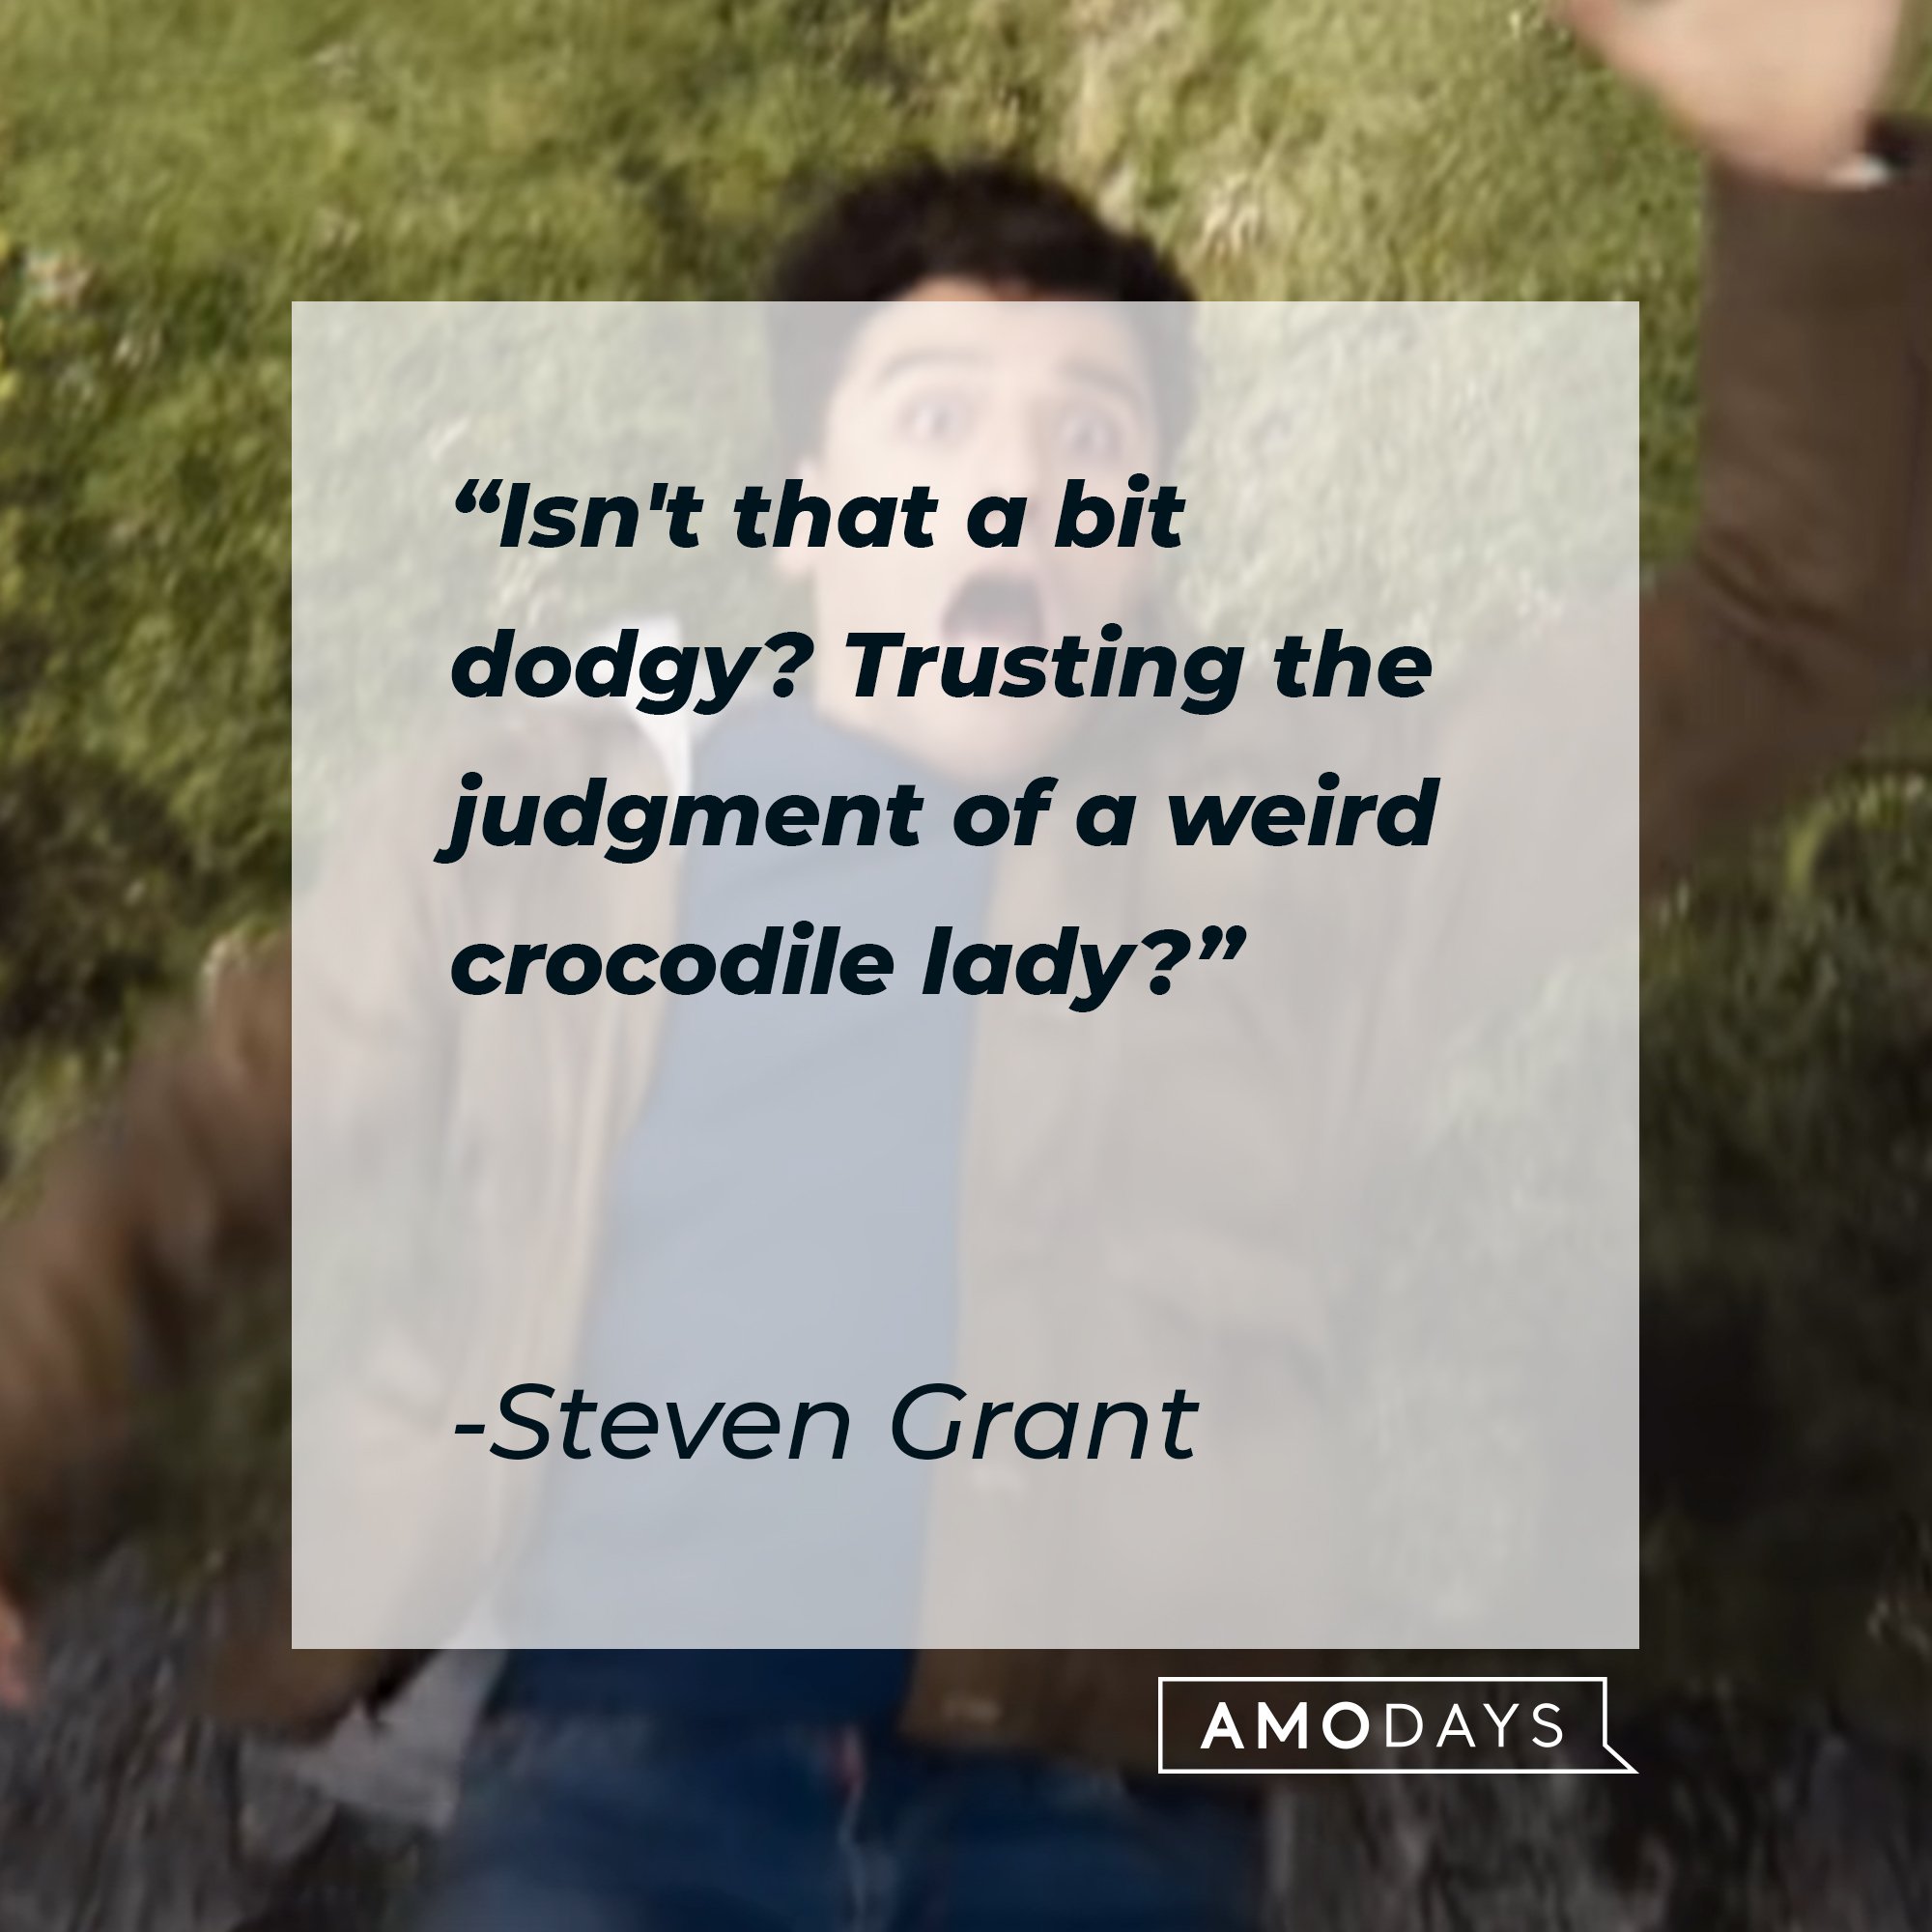  Steven Grant’s quote: "Isn't that a bit dodgy? Trusting the judgment of a weird crocodile lady?" | Image: AmoDays